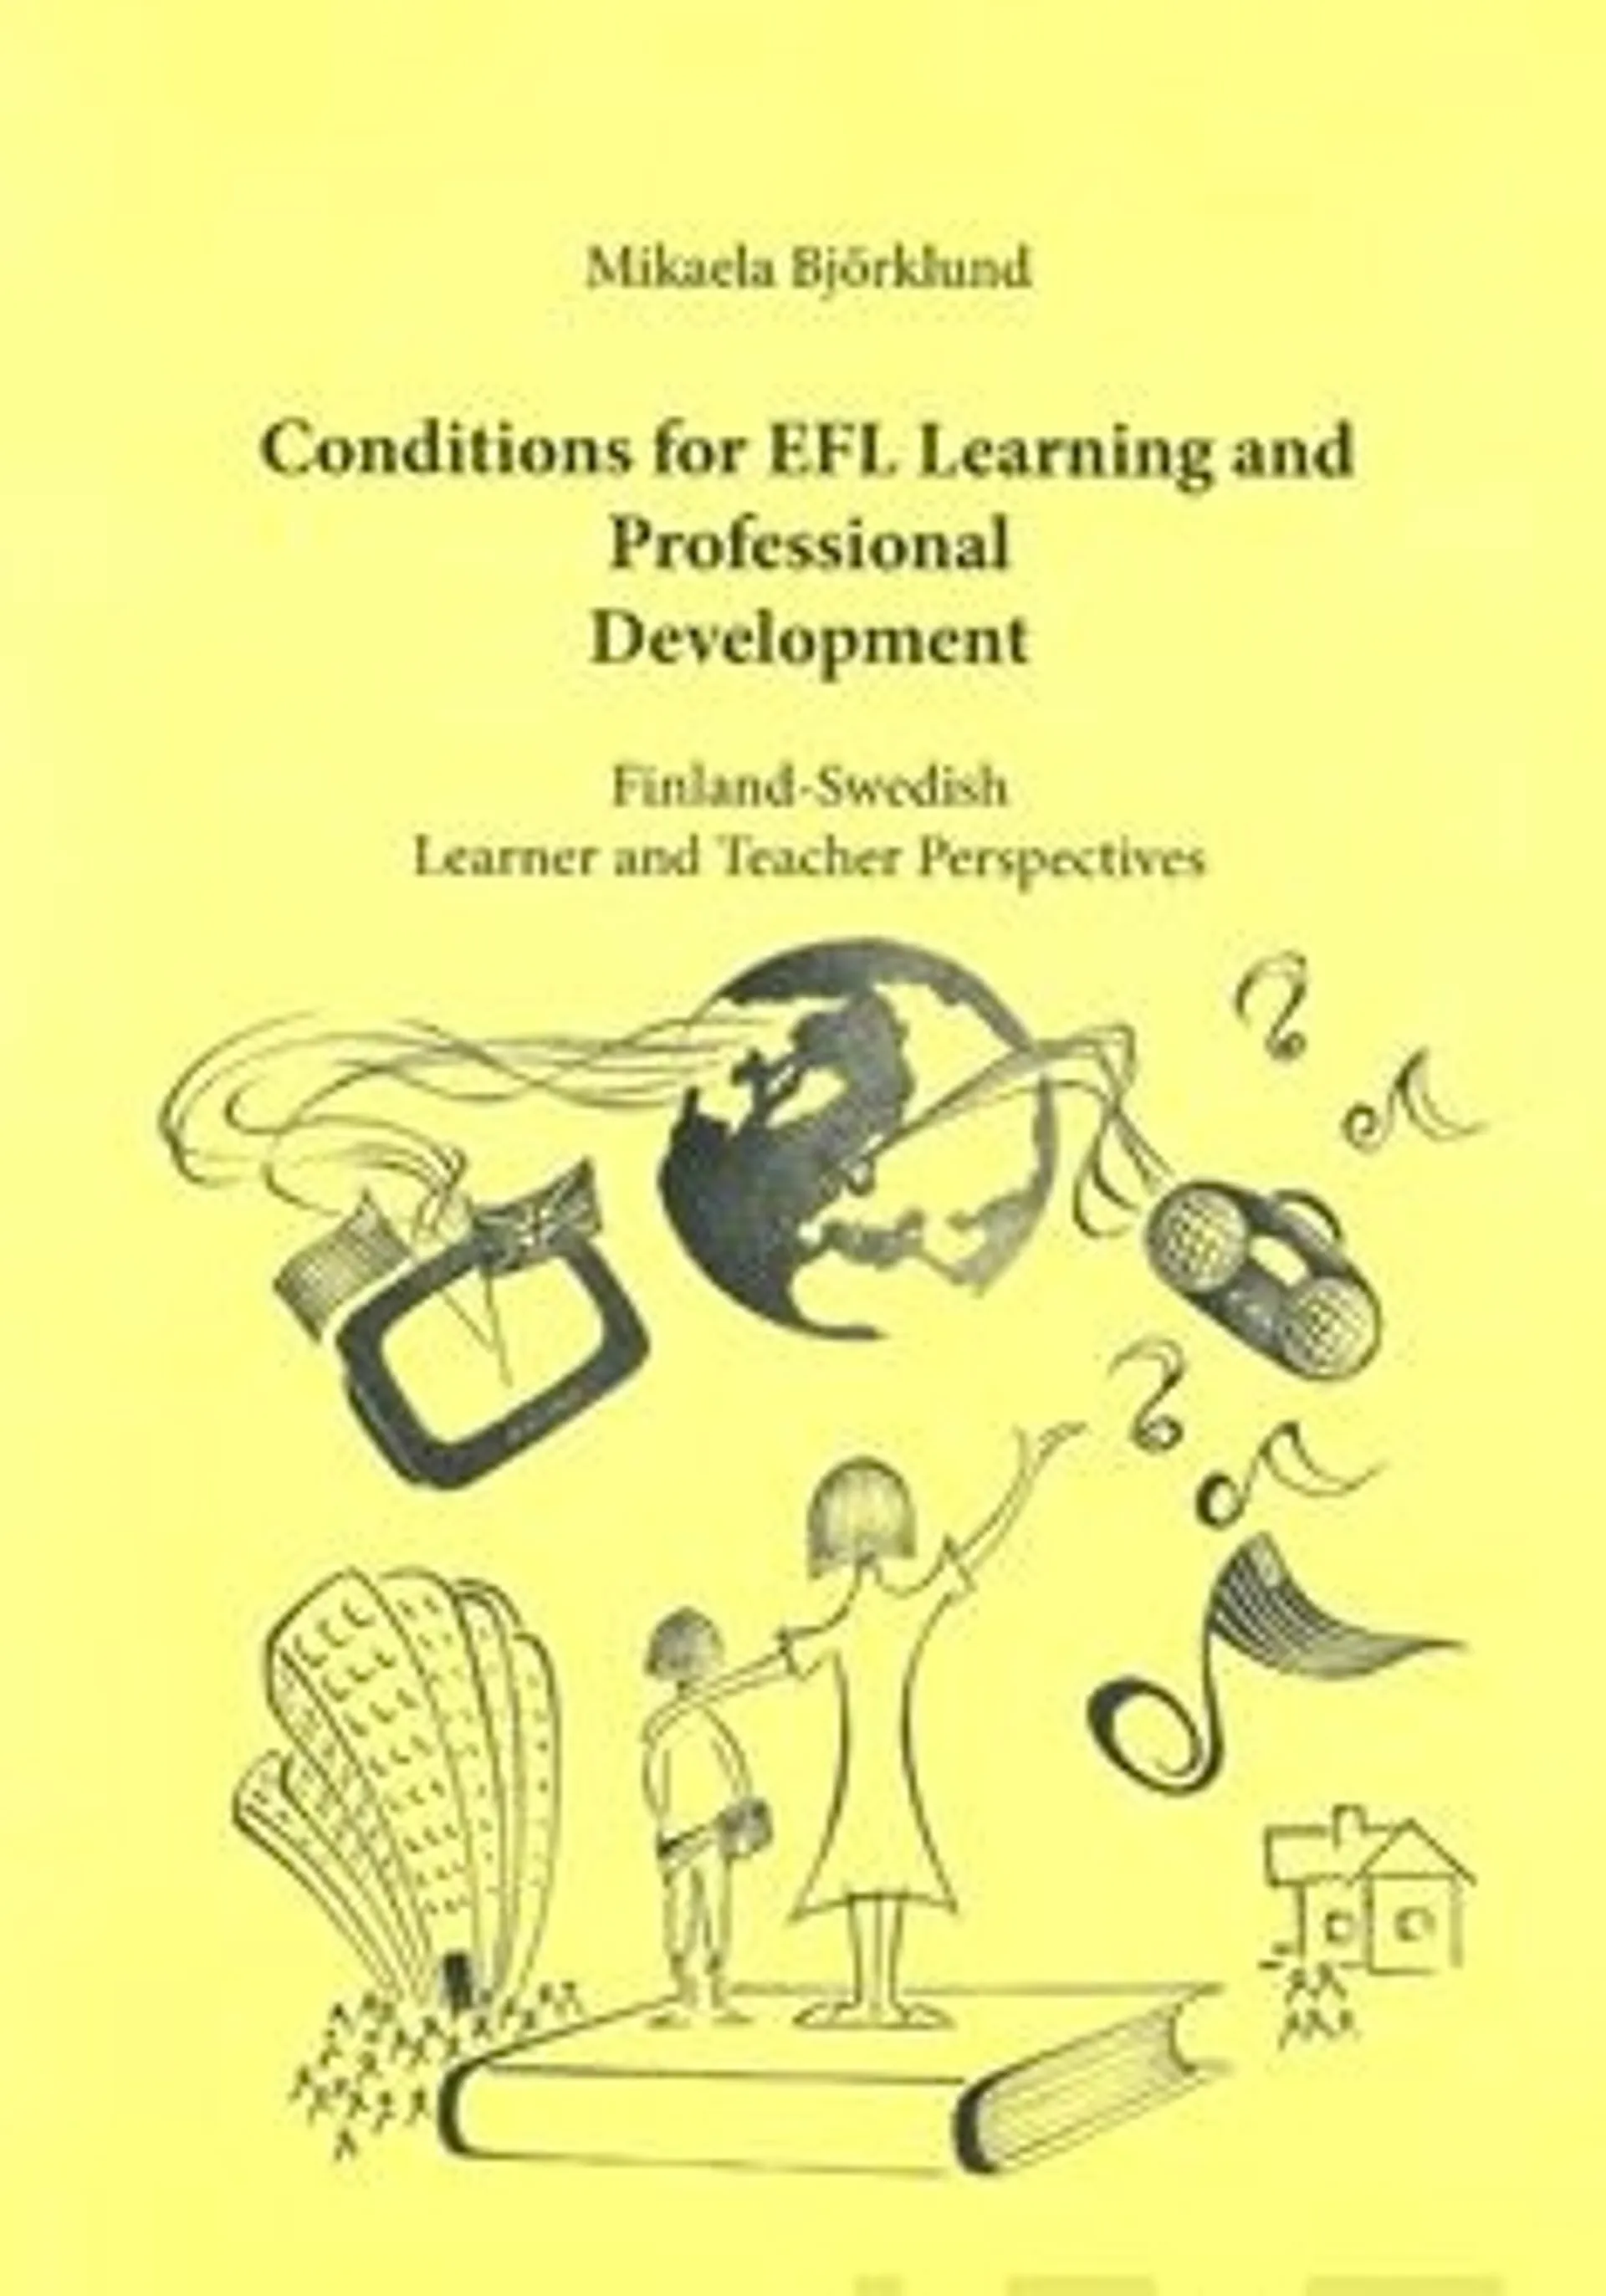 Björklund, Conditions for EFL learning and professional development